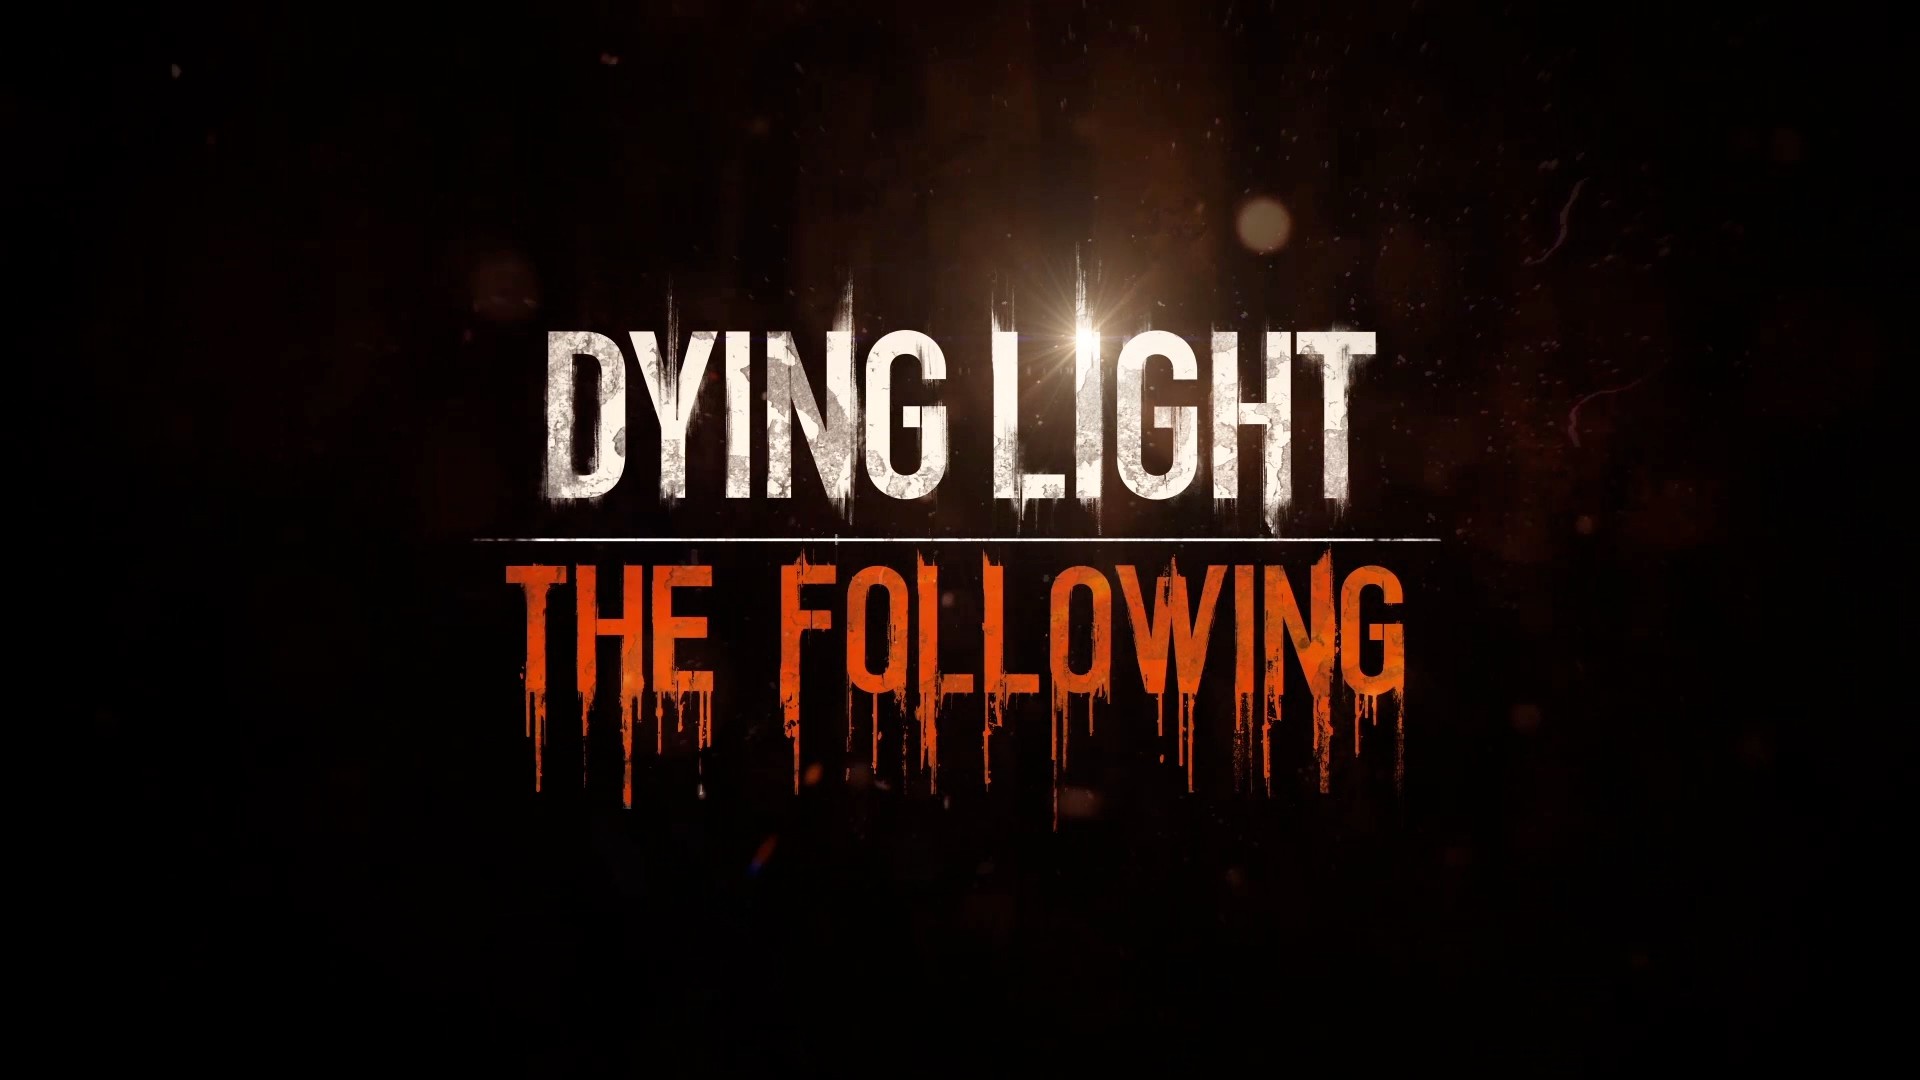 download free dying light definitive edition